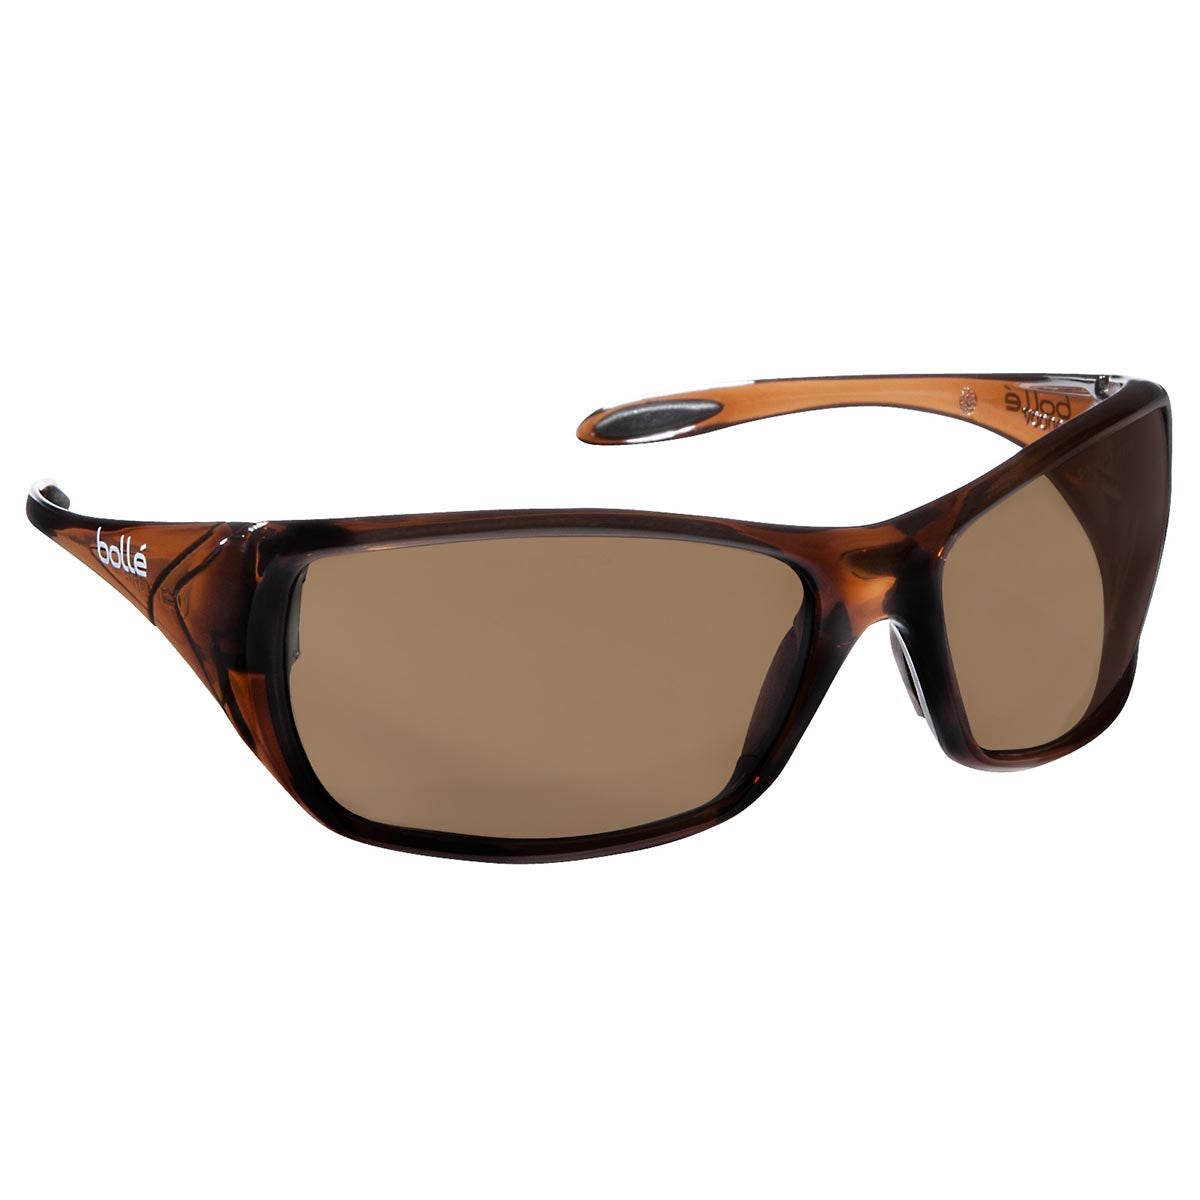 Bolle VOODOO Brown Safety Glasses - VODBPSB